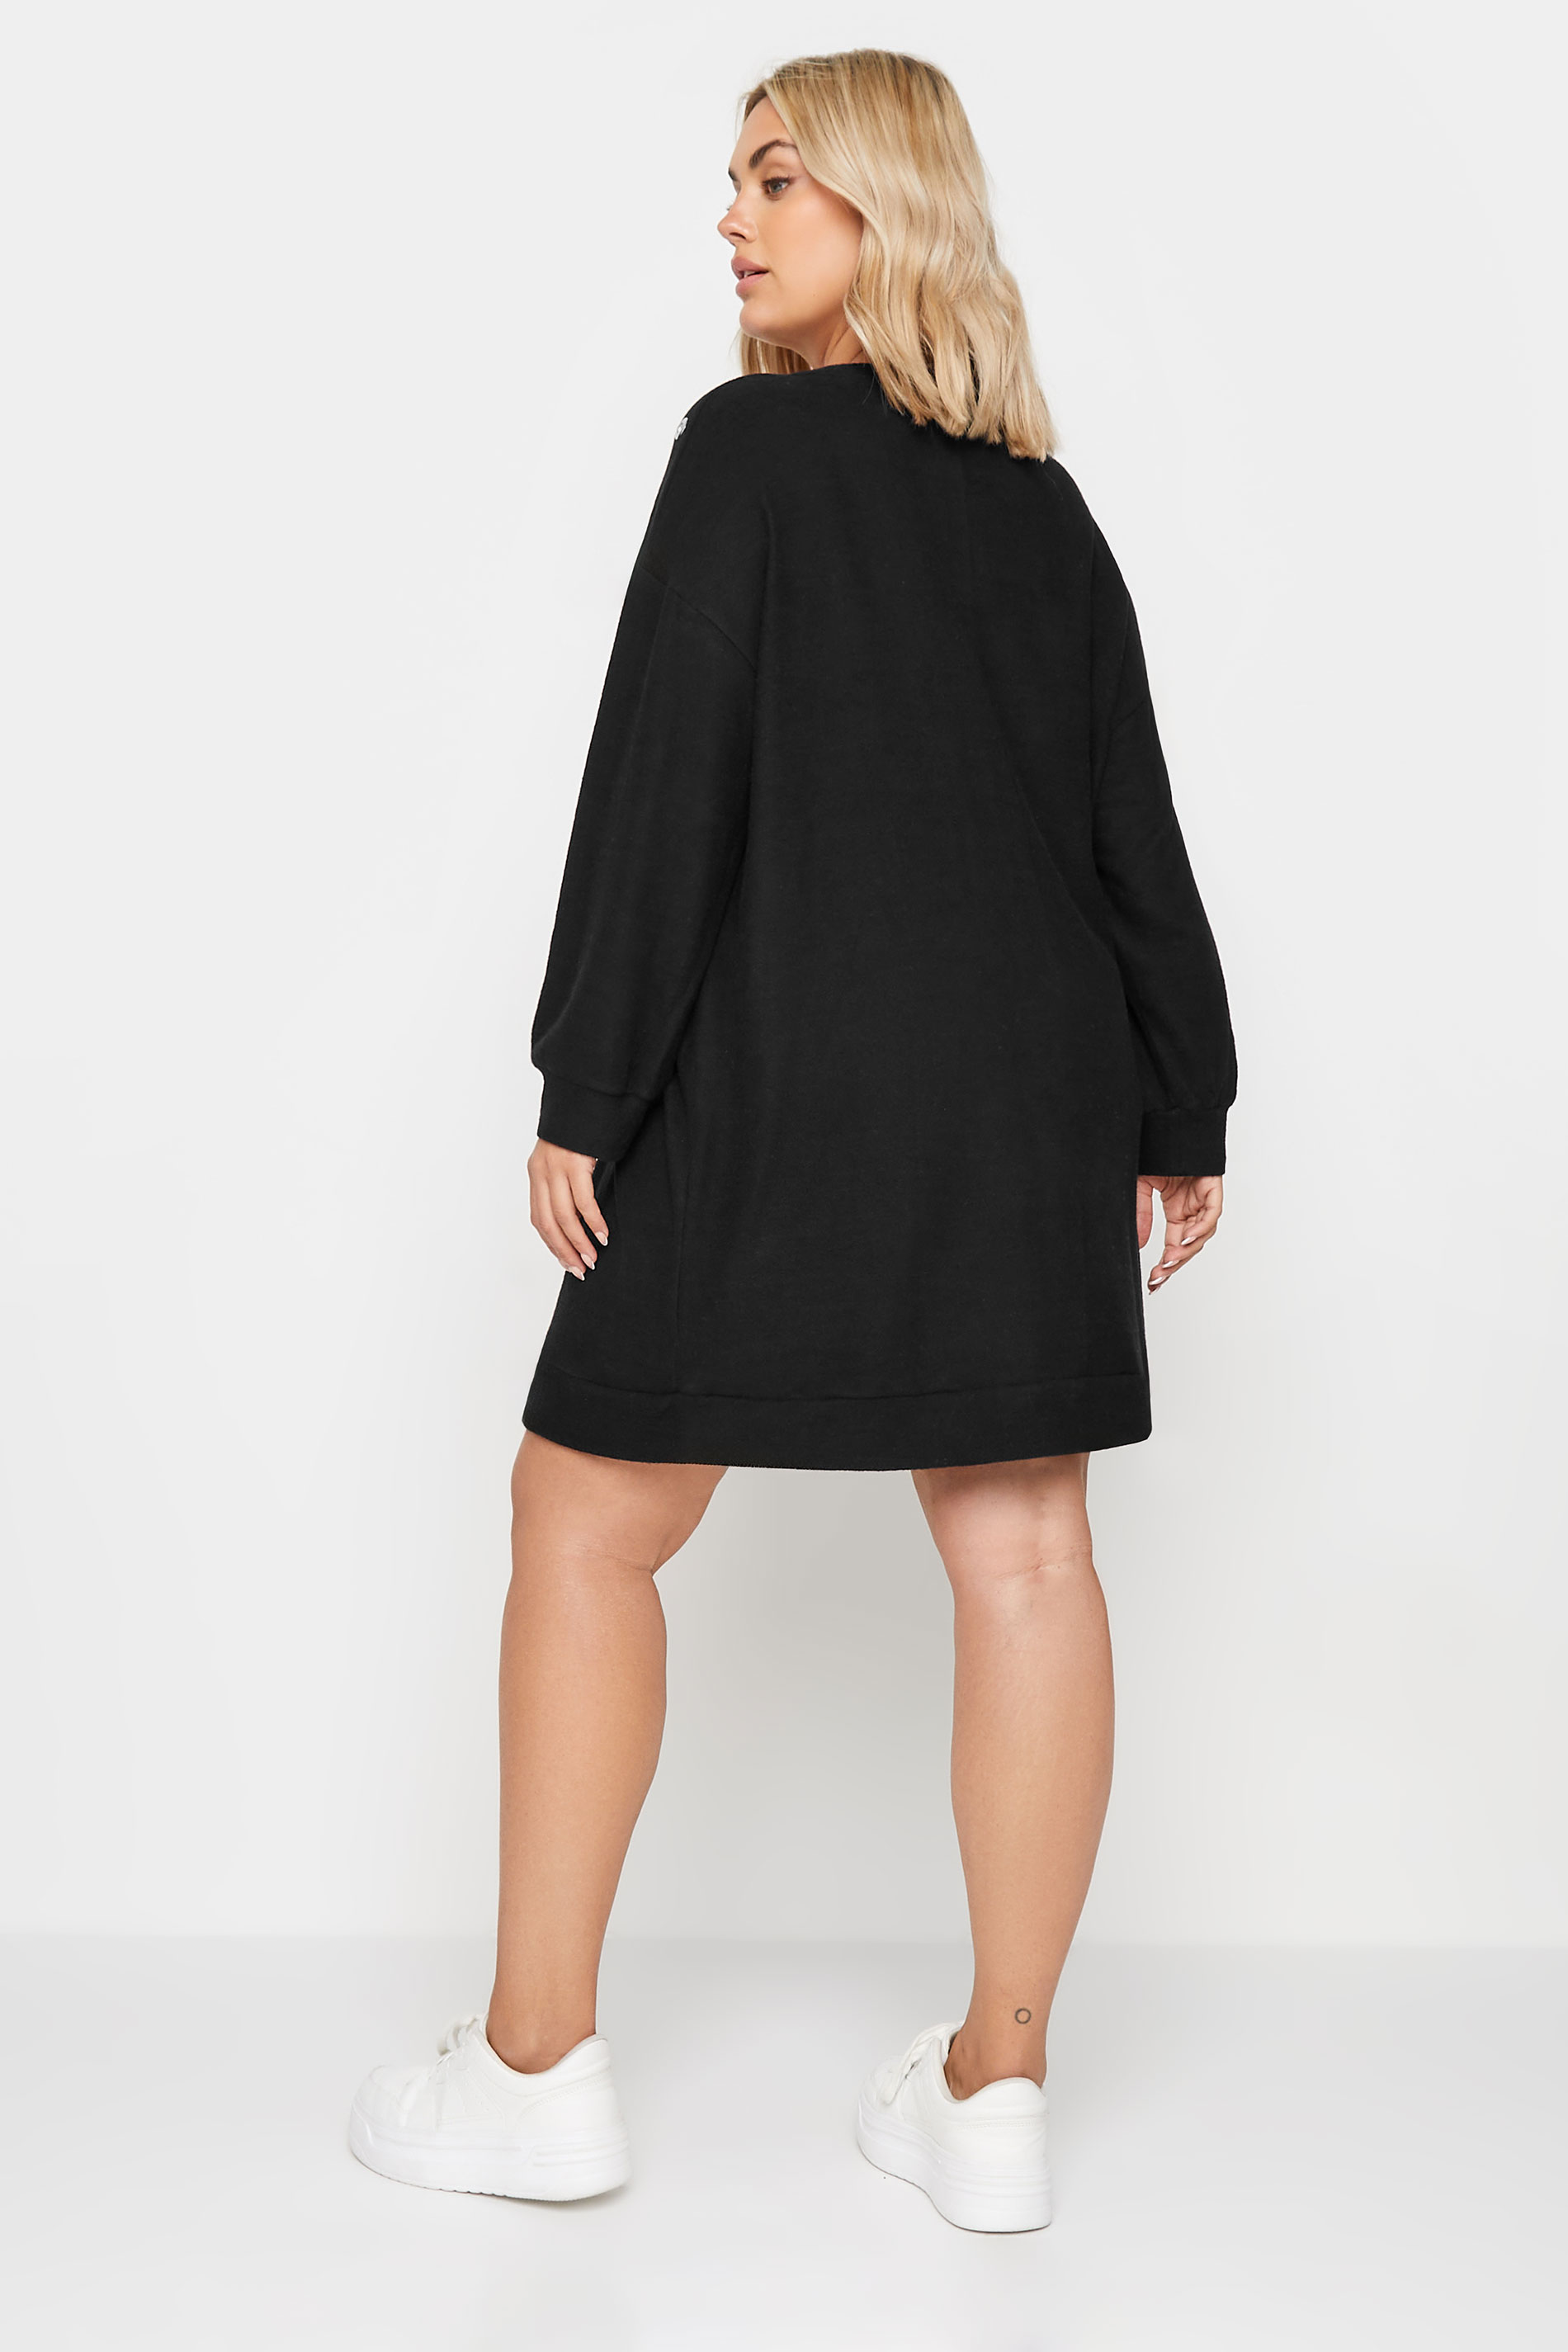 YOURS Plus Size Black Eyelet Soft Touch Jumper Dress | Yours Clothing 3